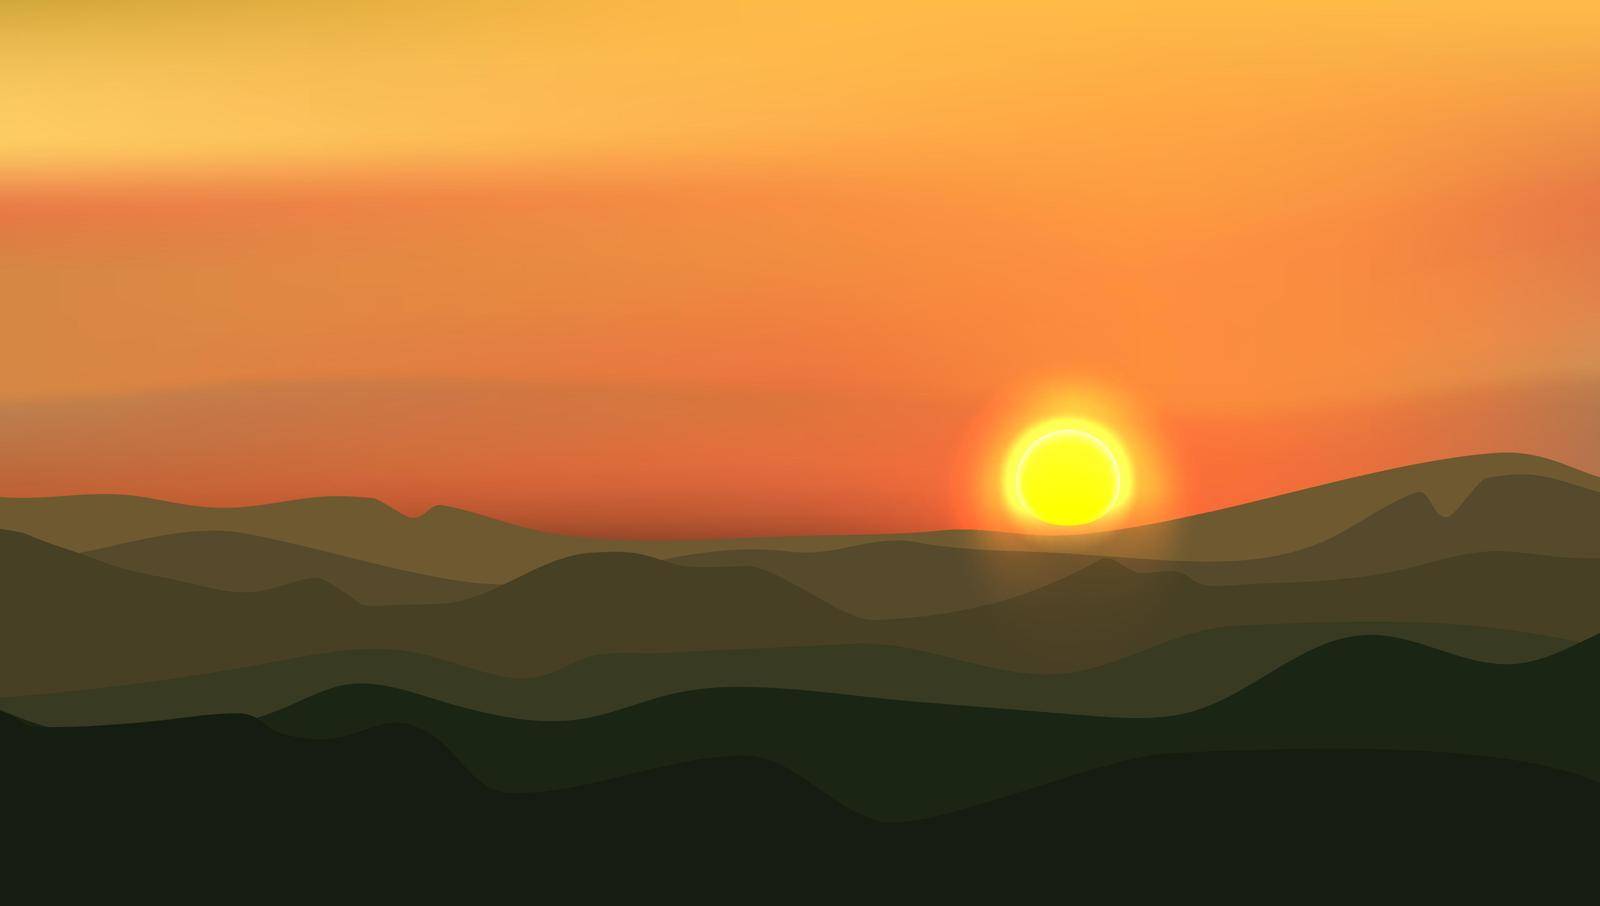 Abstract Nature Sunset Mountain Landscape. EPS10 Vector